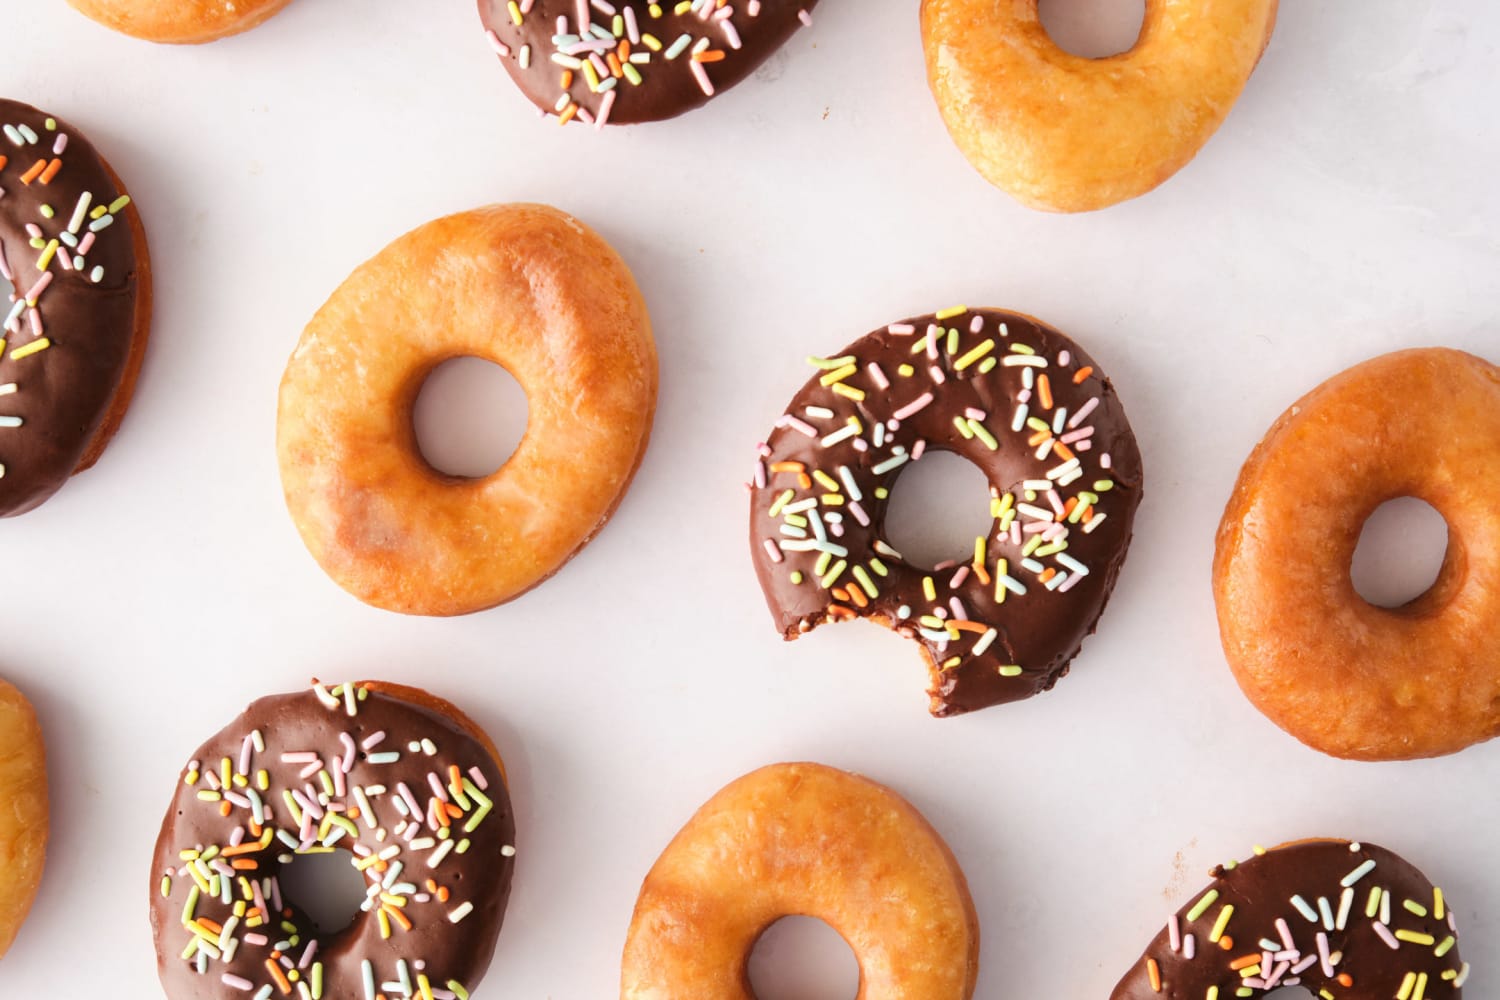 Vegan Yeast Donuts (Can be made glazed or chocolate frosted)